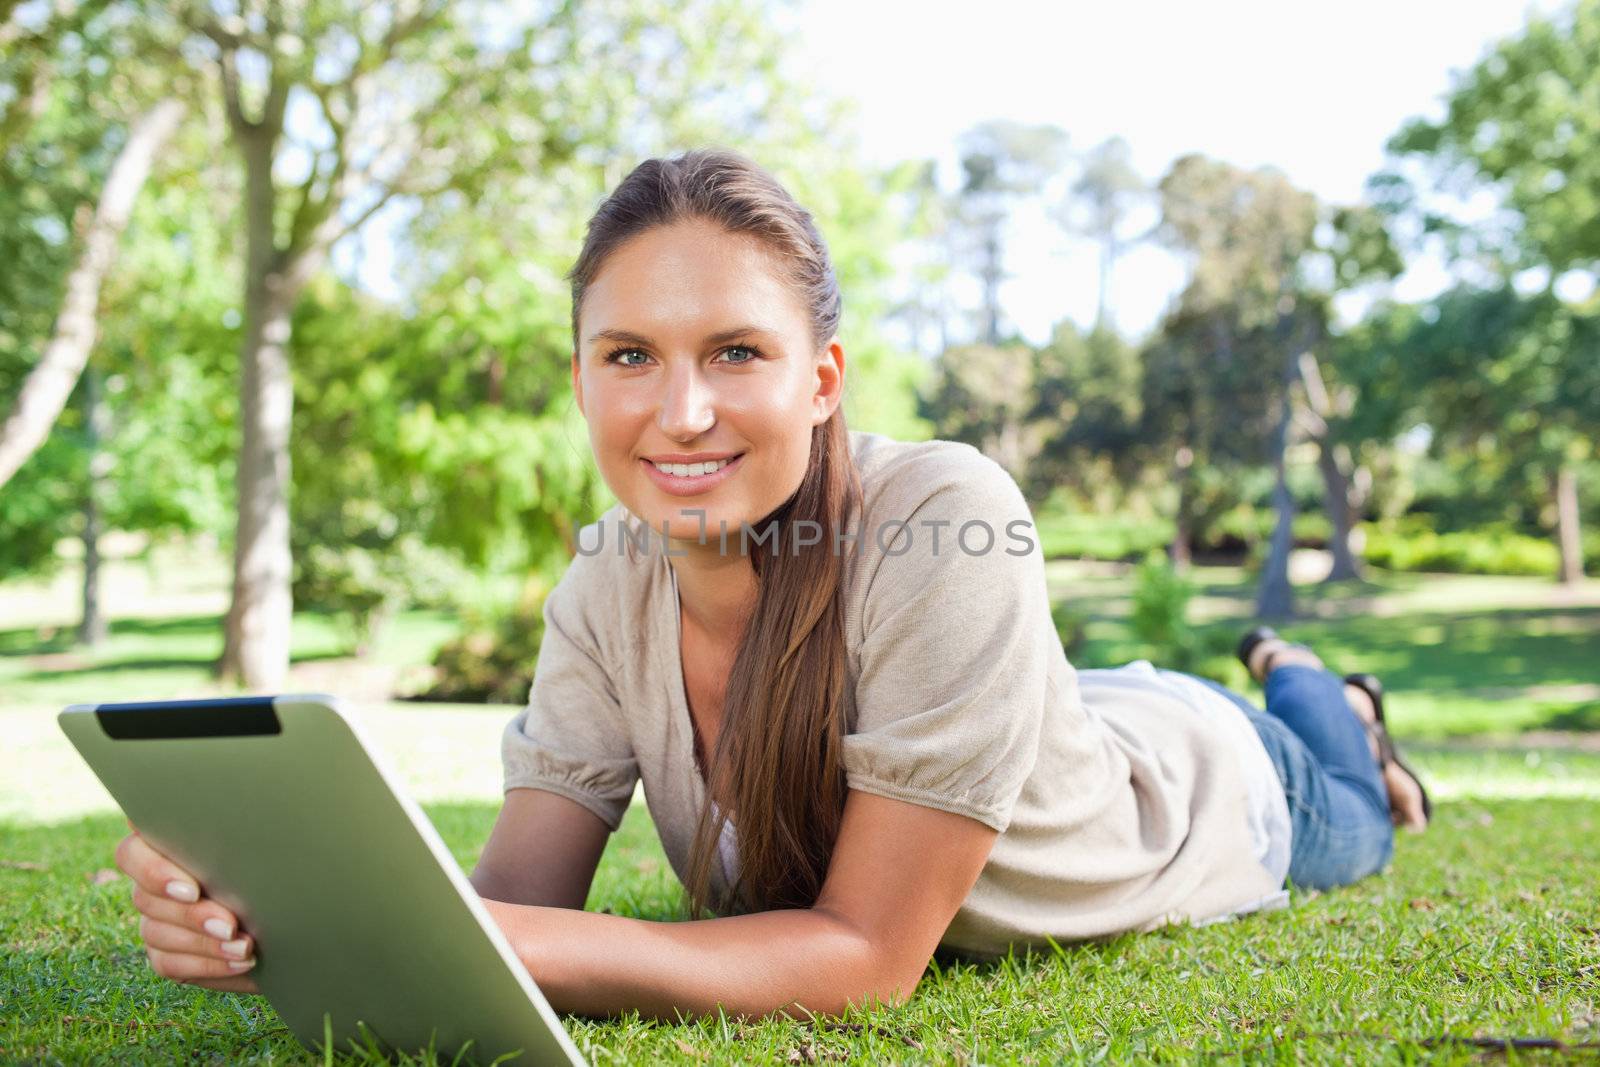 Smiling young woman with her tablet computer lying on the lawn